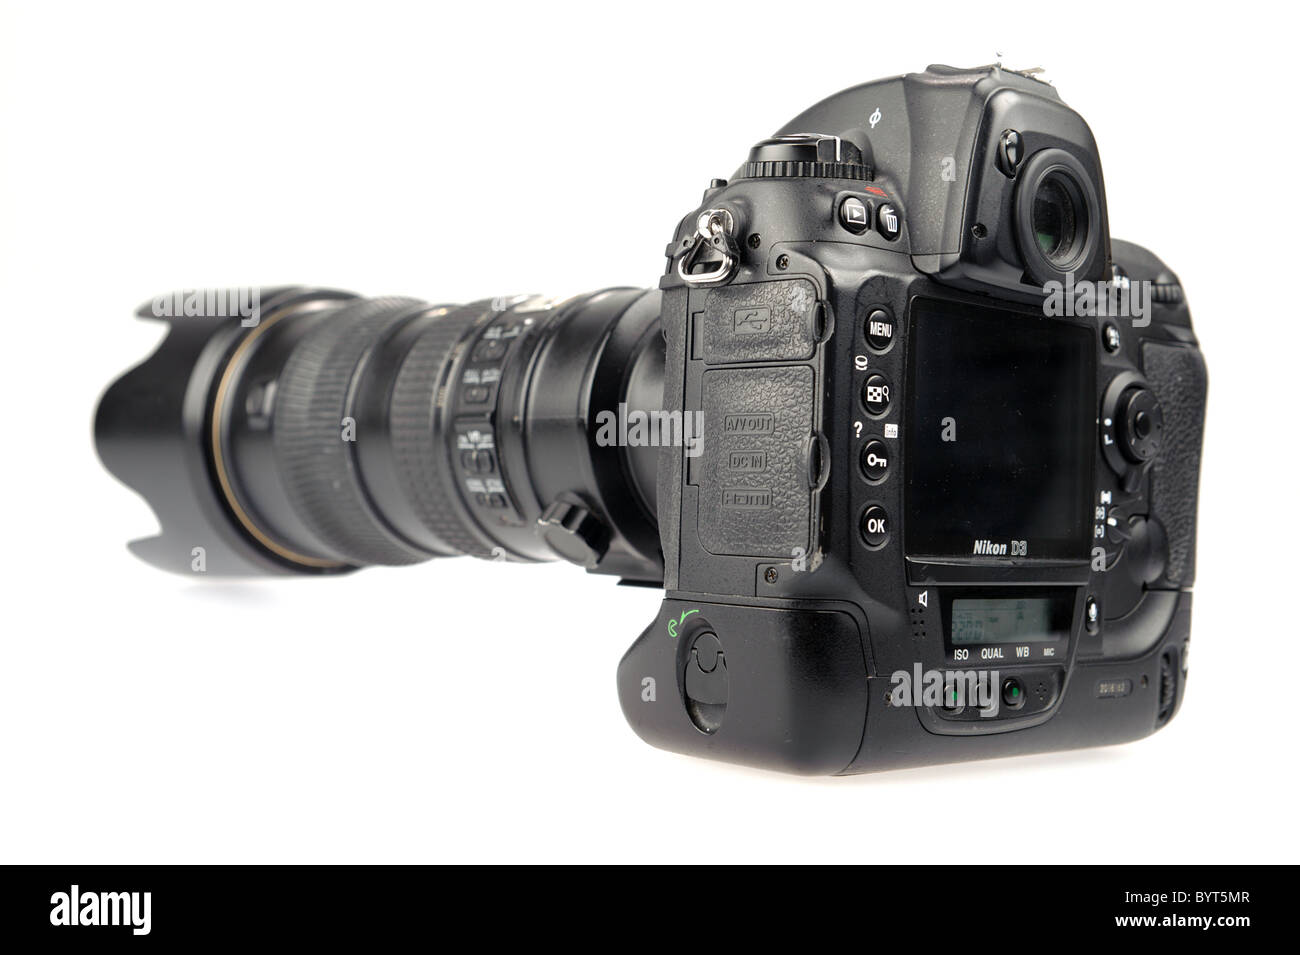 Rear view of a Nikon D3 digital camera with Nikkor 70-200mm 2.8 VR lens cutout on white background Stock Photo